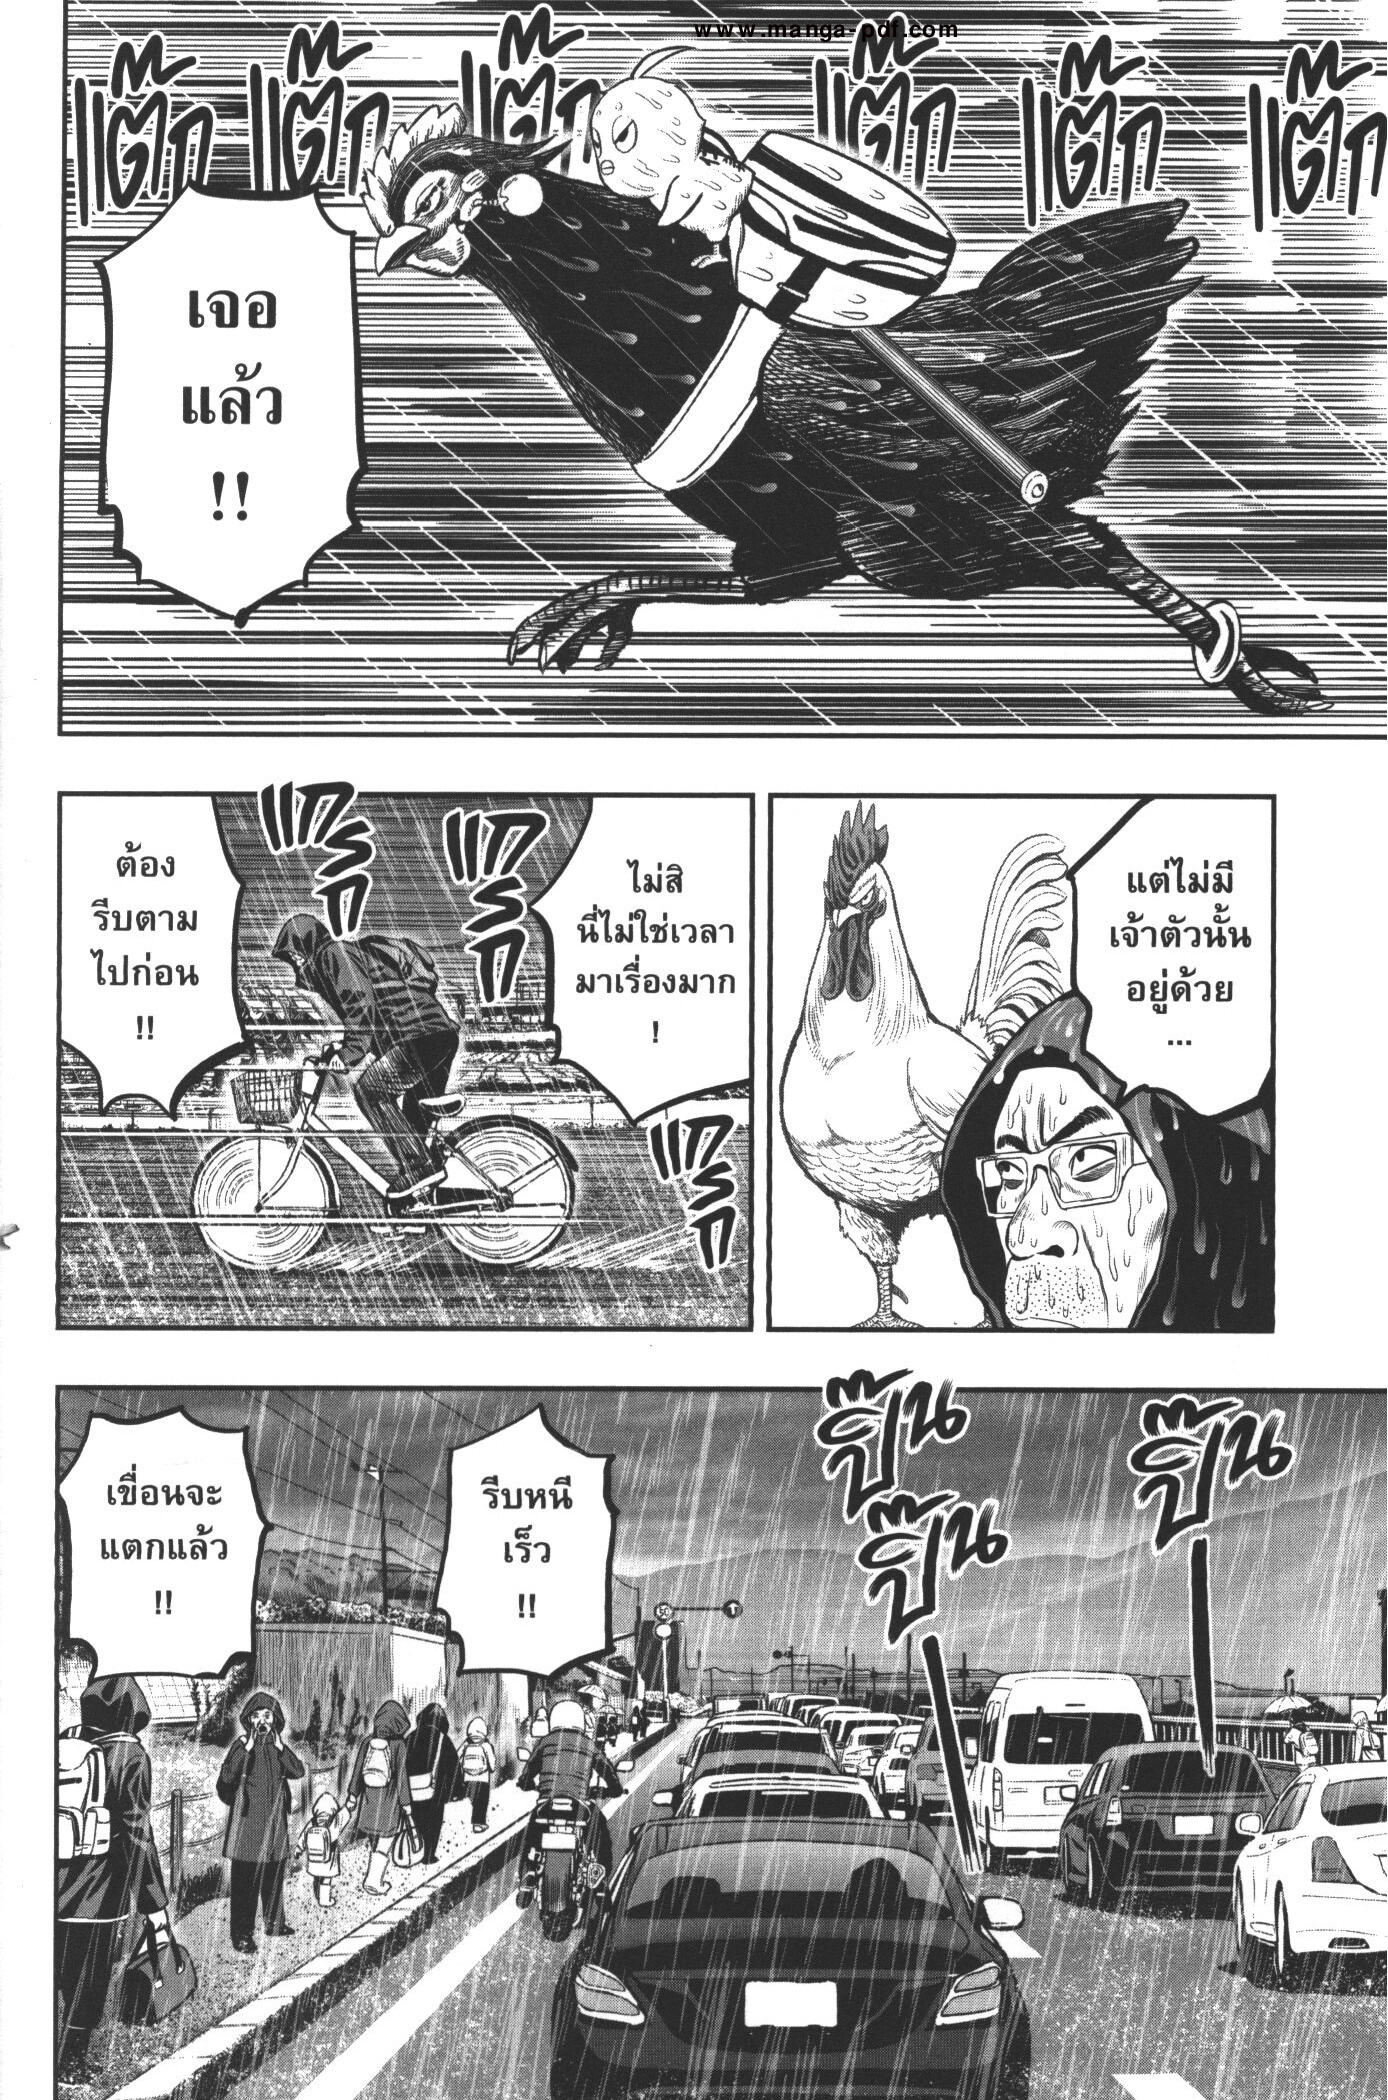 Rooster Fighter 14 (14)